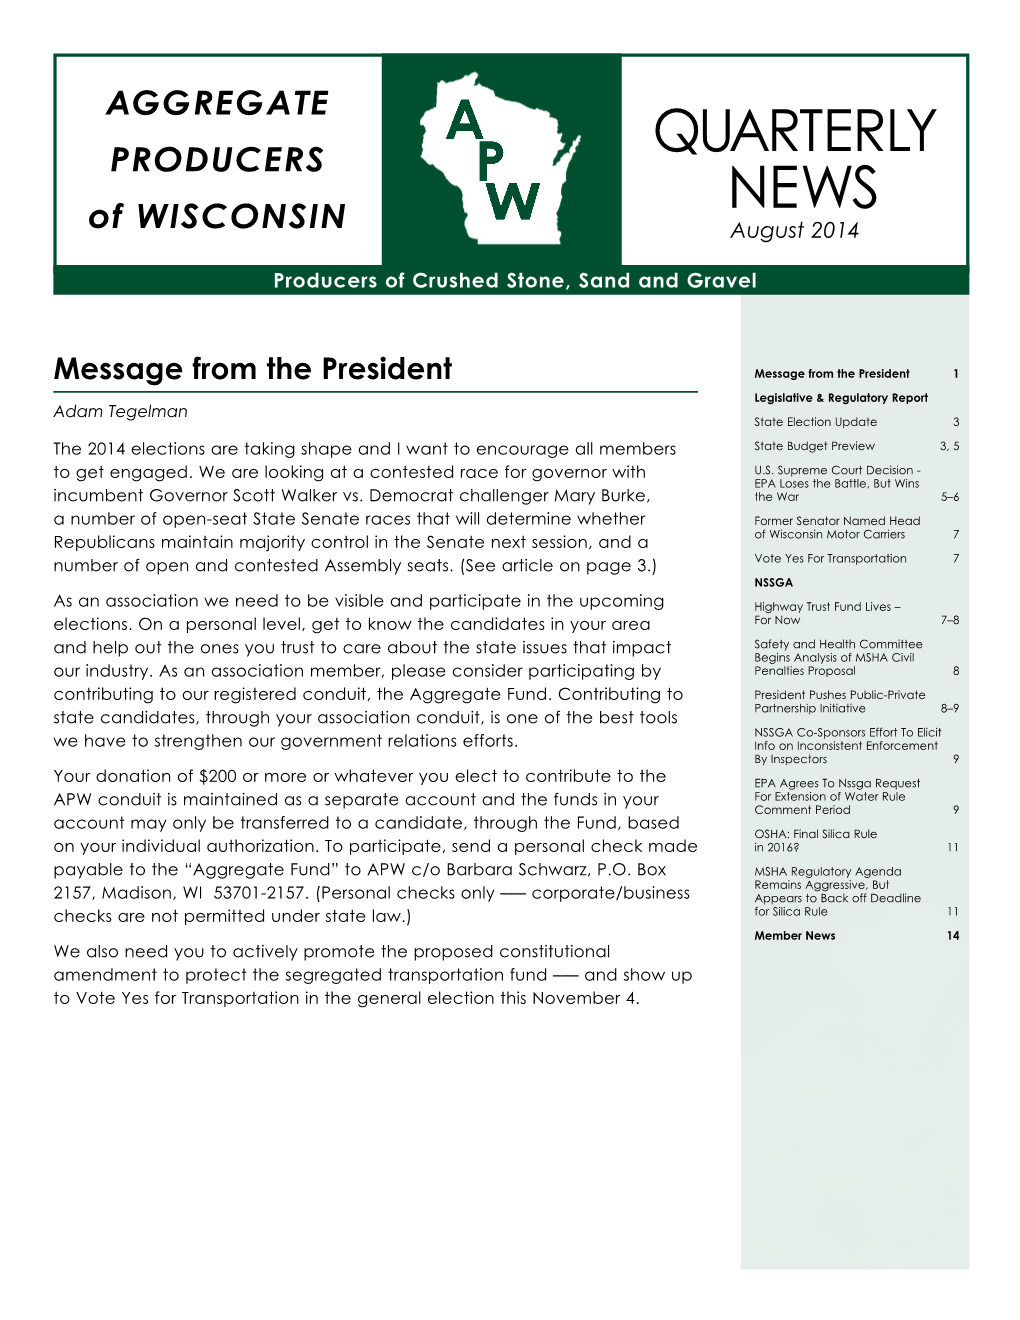 QUARTERLY NEWS of WISCONSIN August 2014